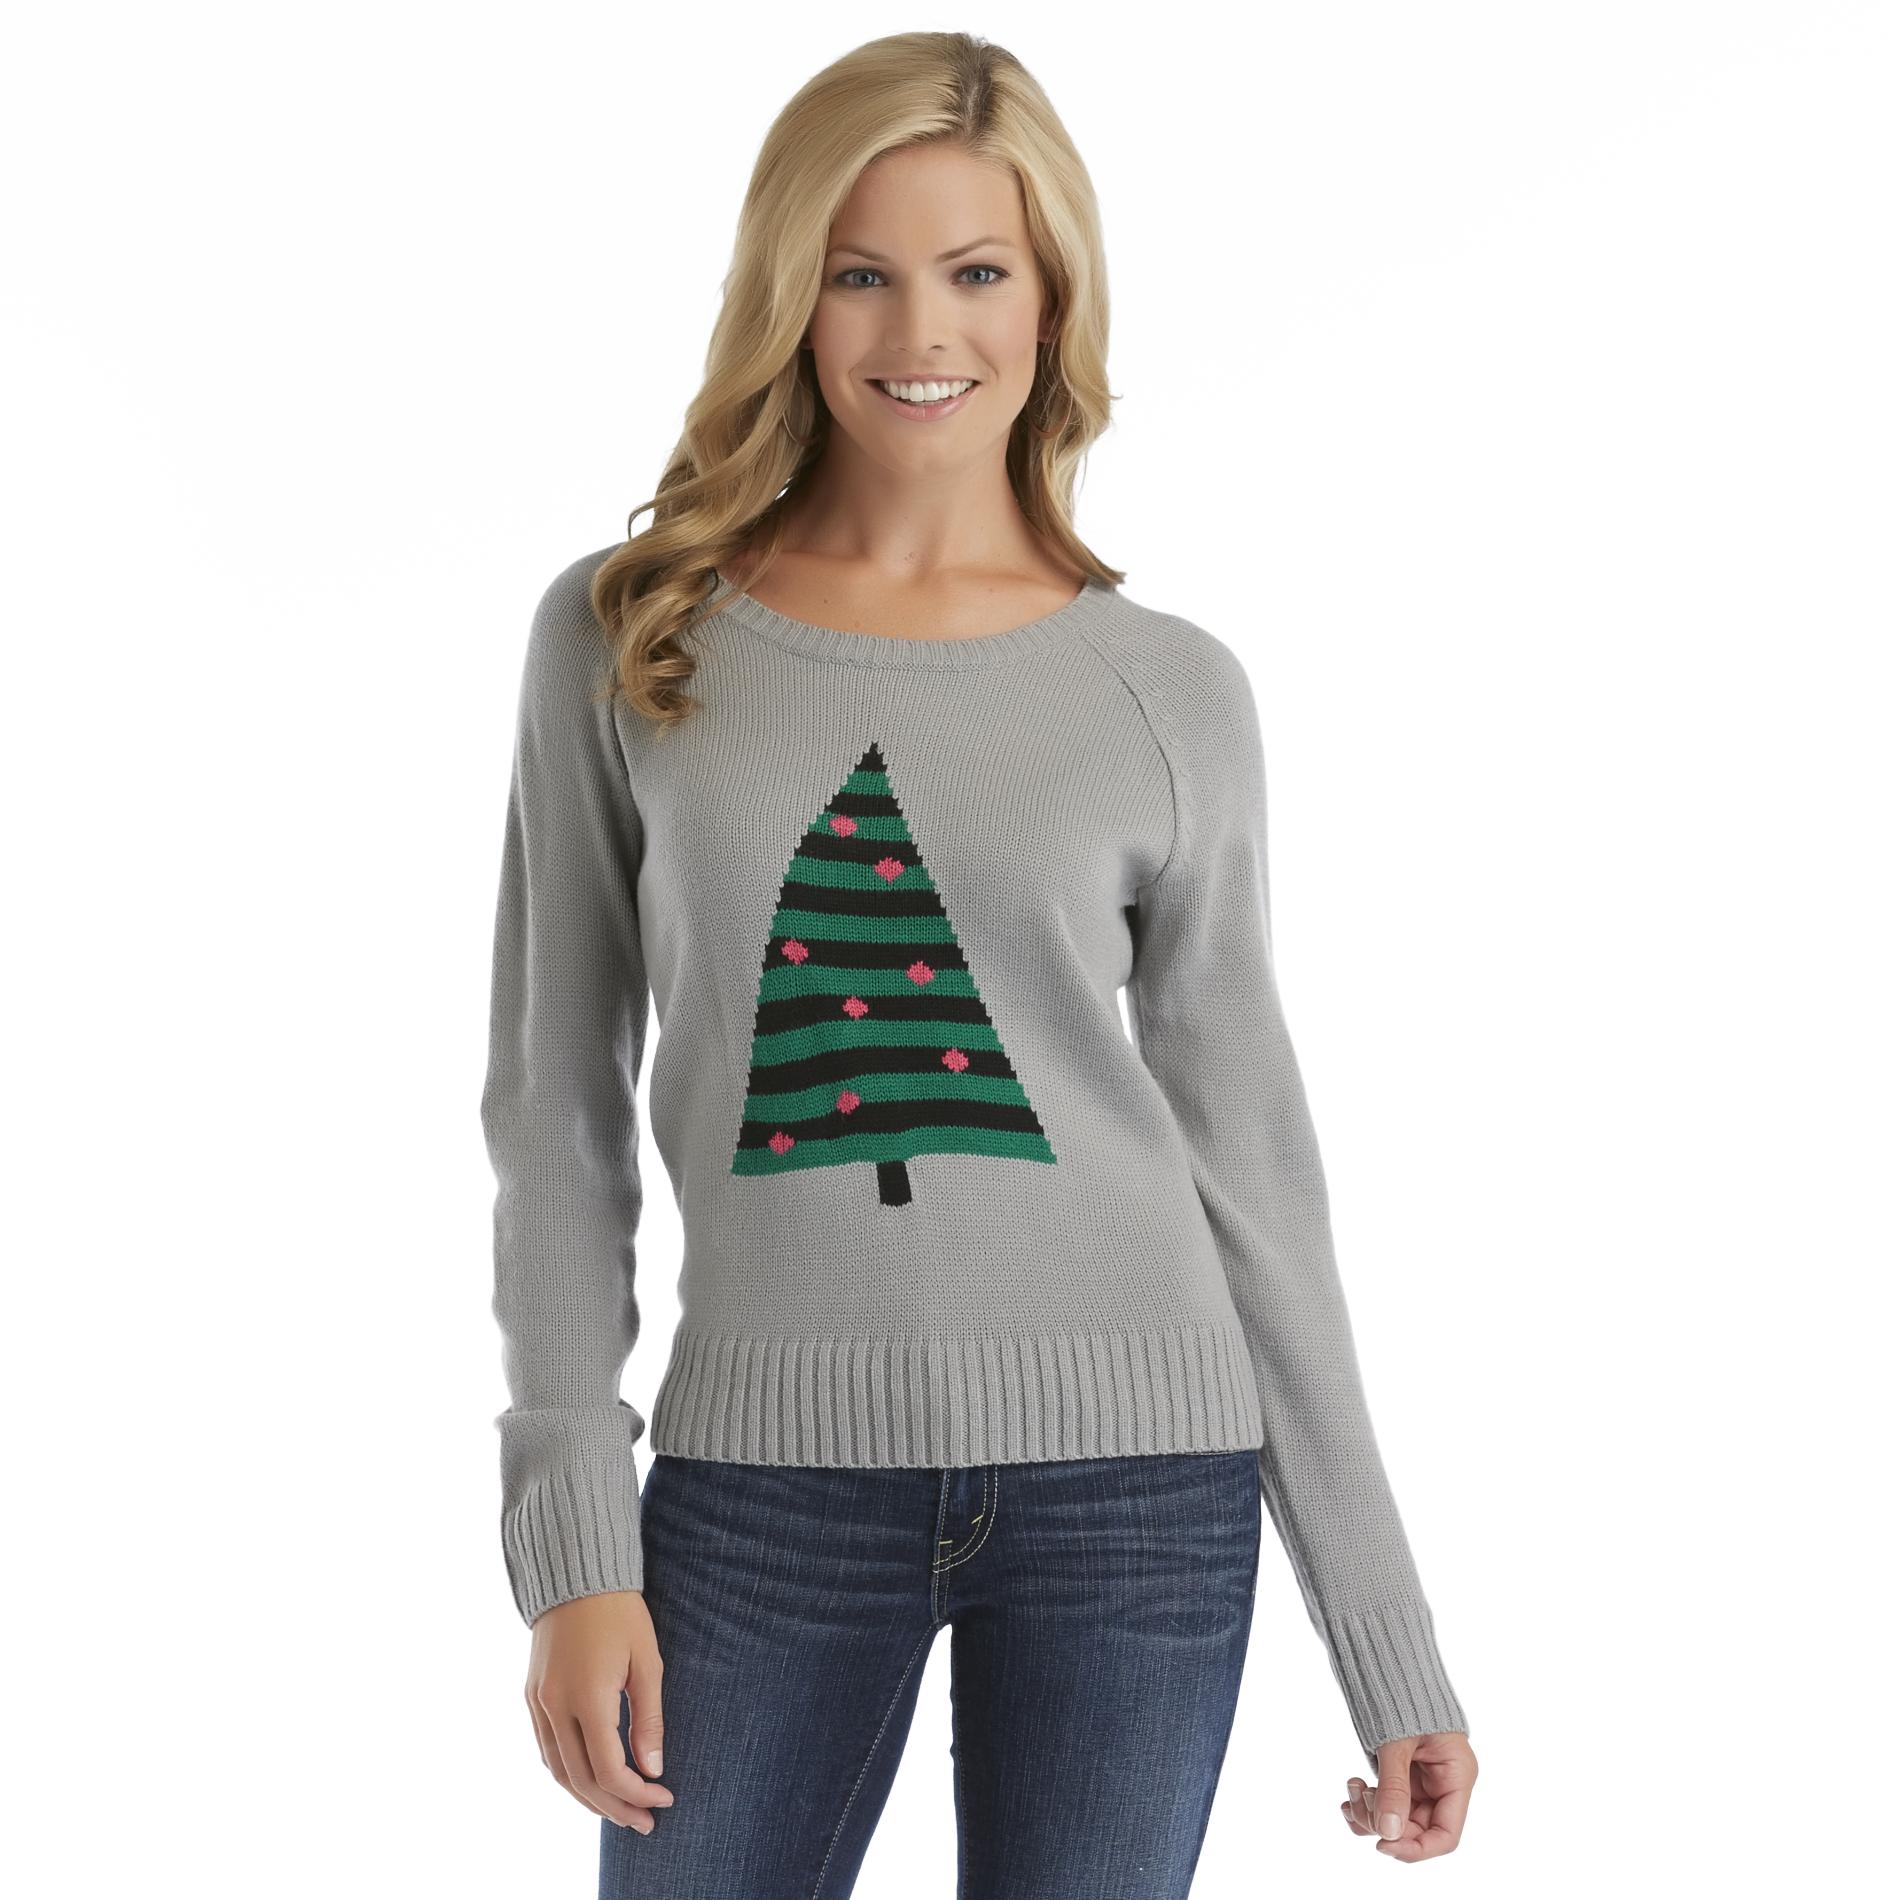 Route 66 Women's Knit Sweater - Christmas Tree